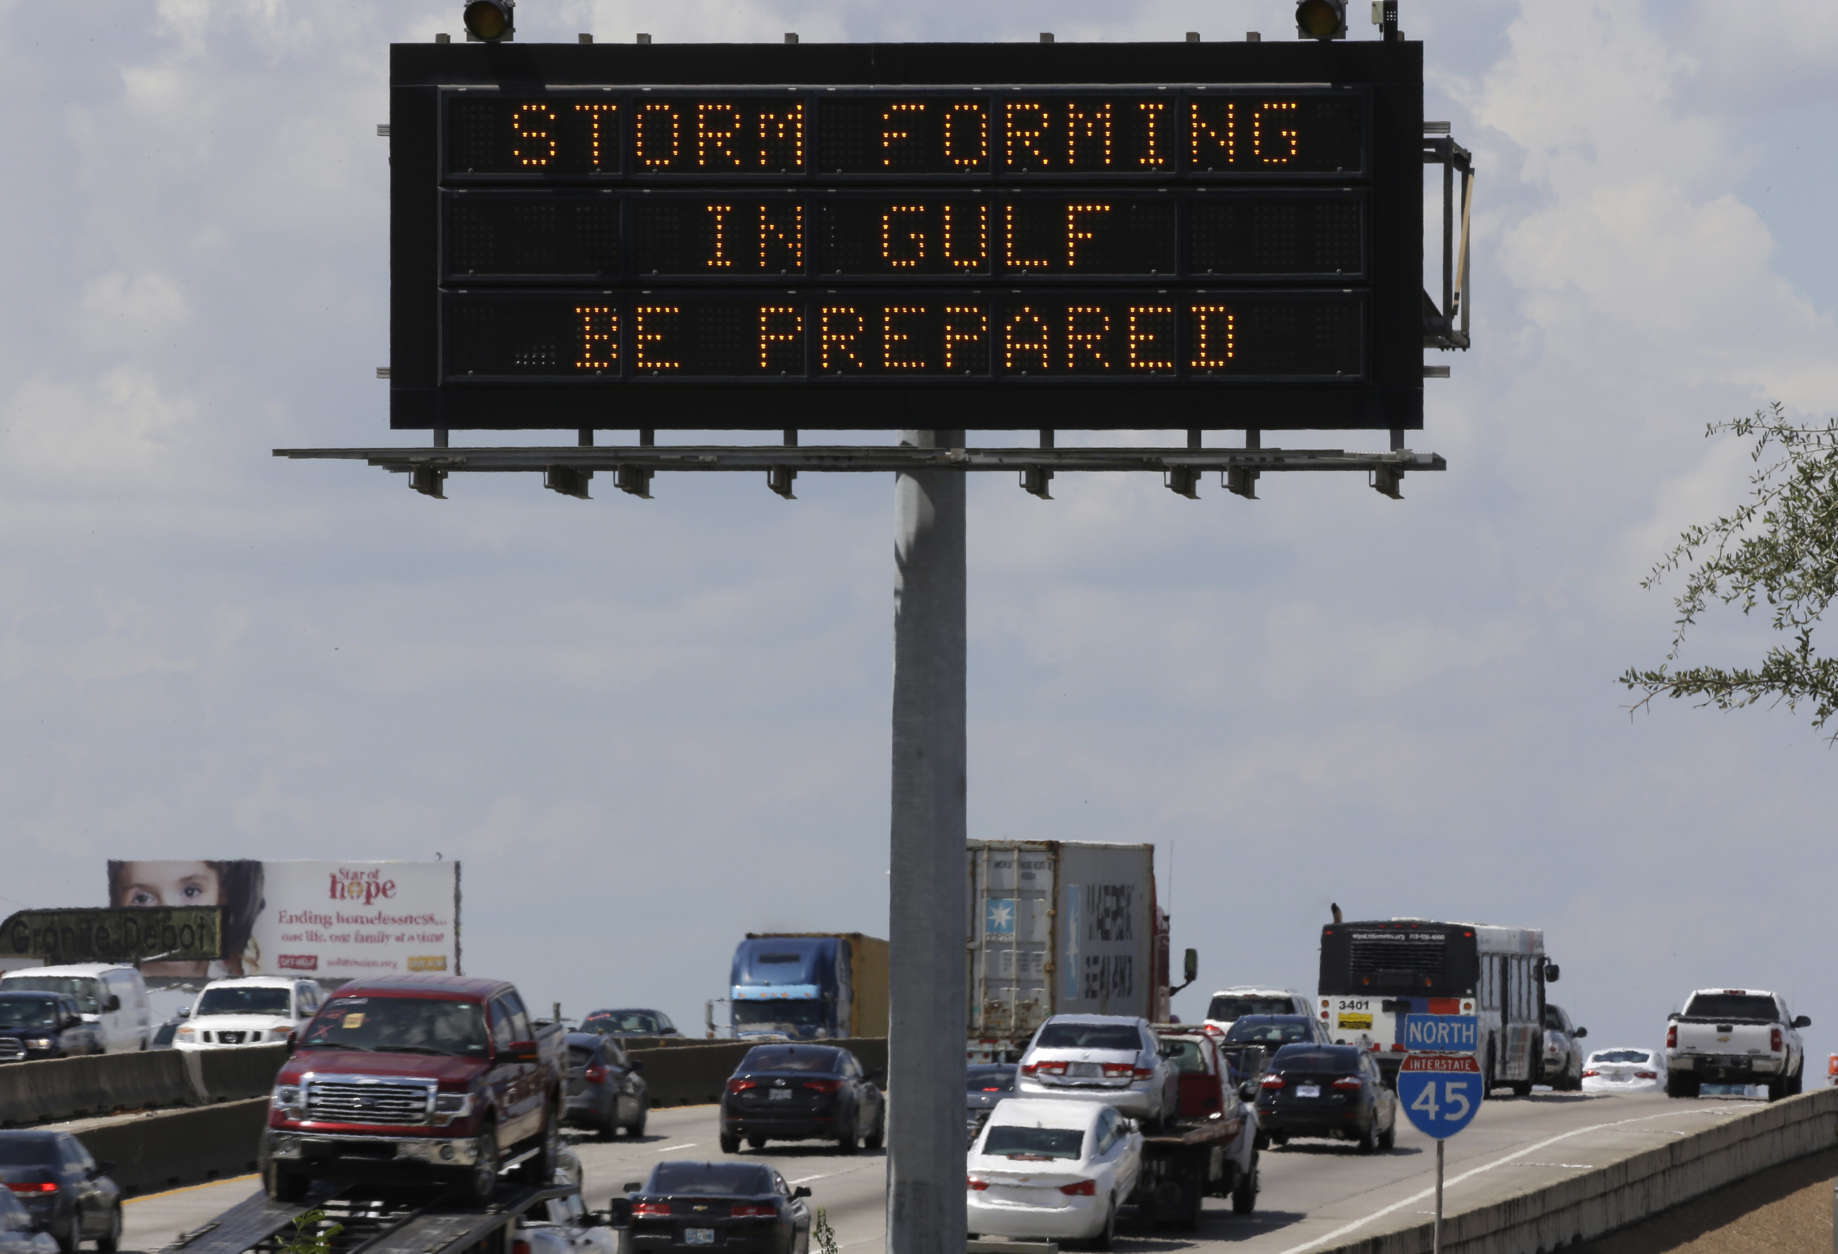 Motorists in Houston pass a sign warning of Hurricane Harvey as the storm intensifies in the Gulf of Mexico, Thursday, Aug. 24, 2017. Harvey is forecast to be a major hurricane when it makes landfall along the middle Texas coastline Friday. (AP Photo/David J. Phillip)